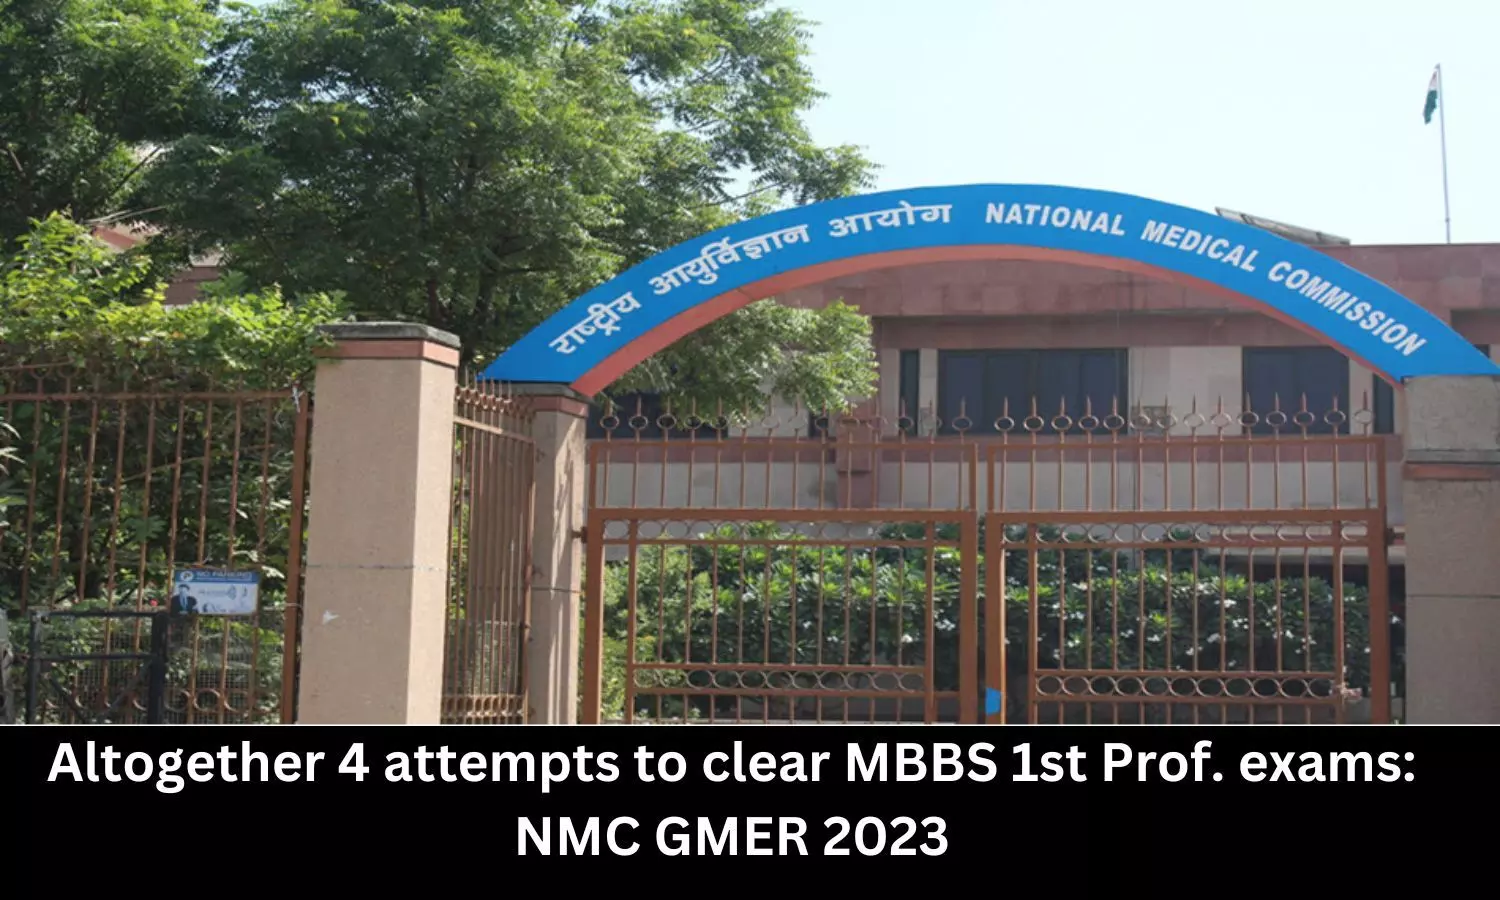 NMC GMER 2023: Altogether 4 attempts to clear MBBS 1st Prof. exams